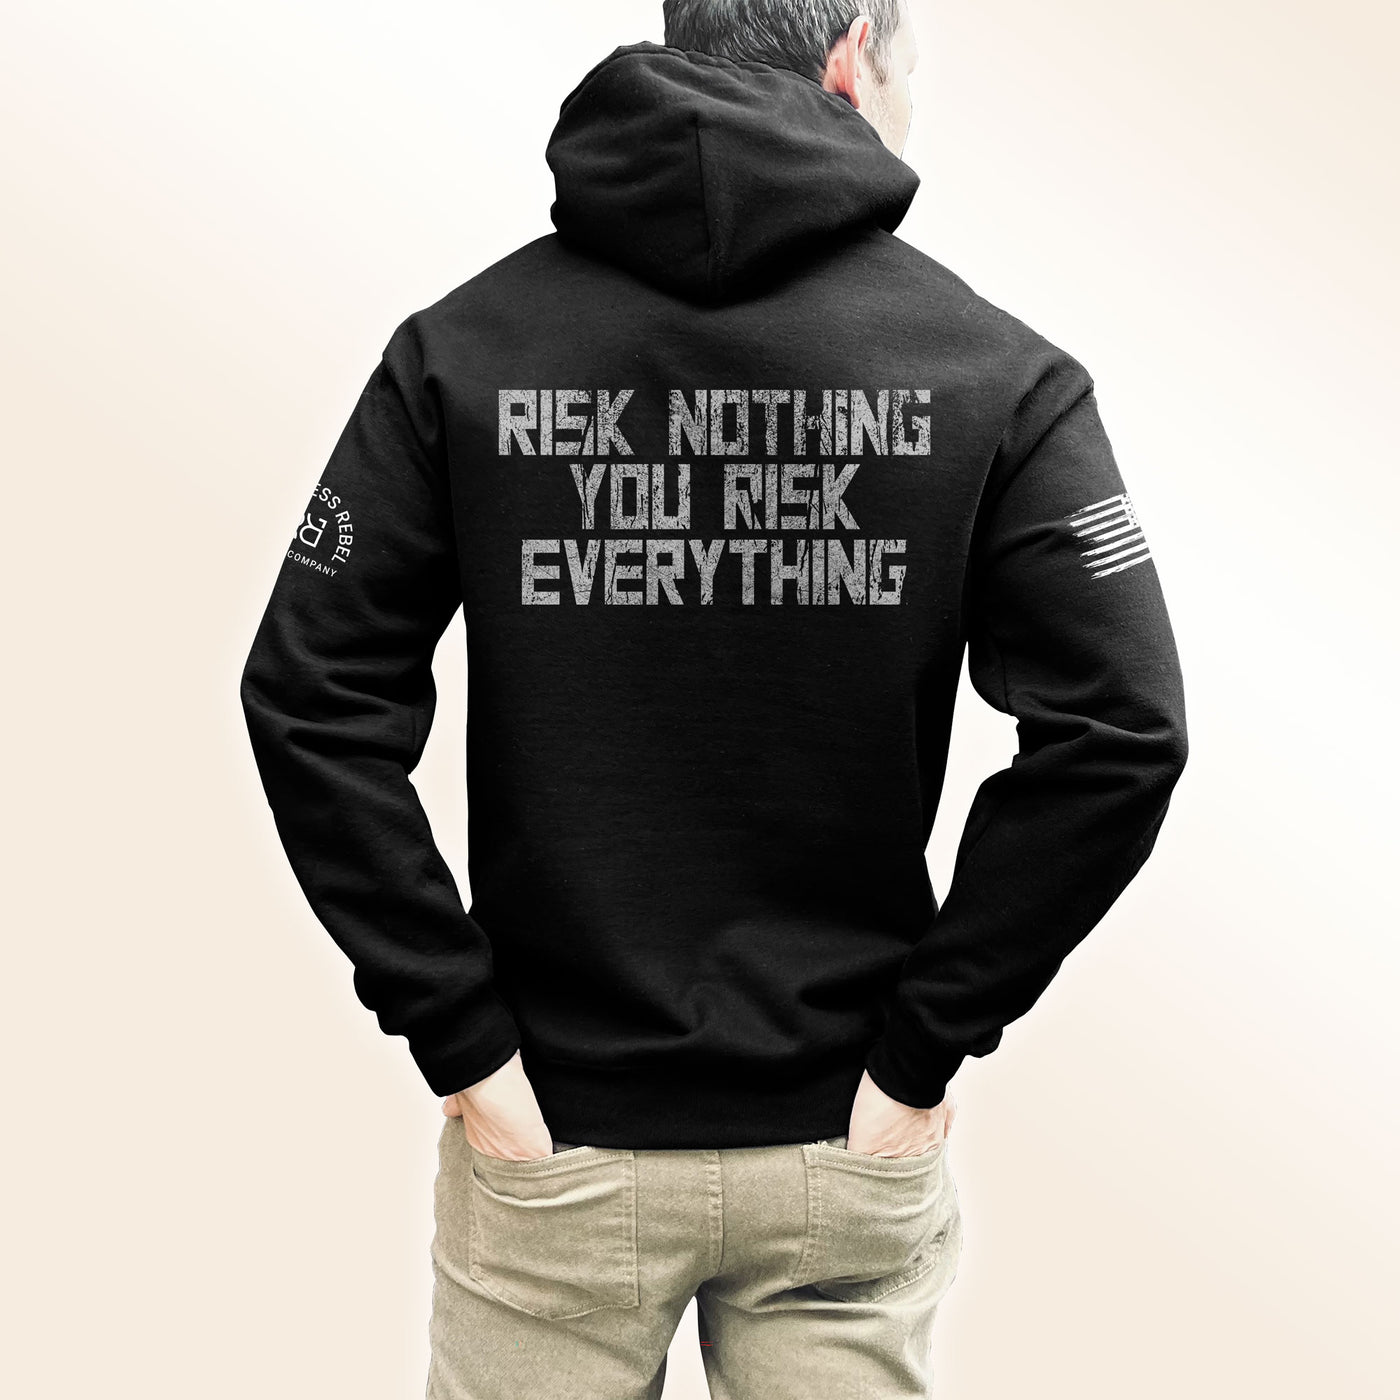 Risk Nothing You Risk Everything | Men's Hoodie